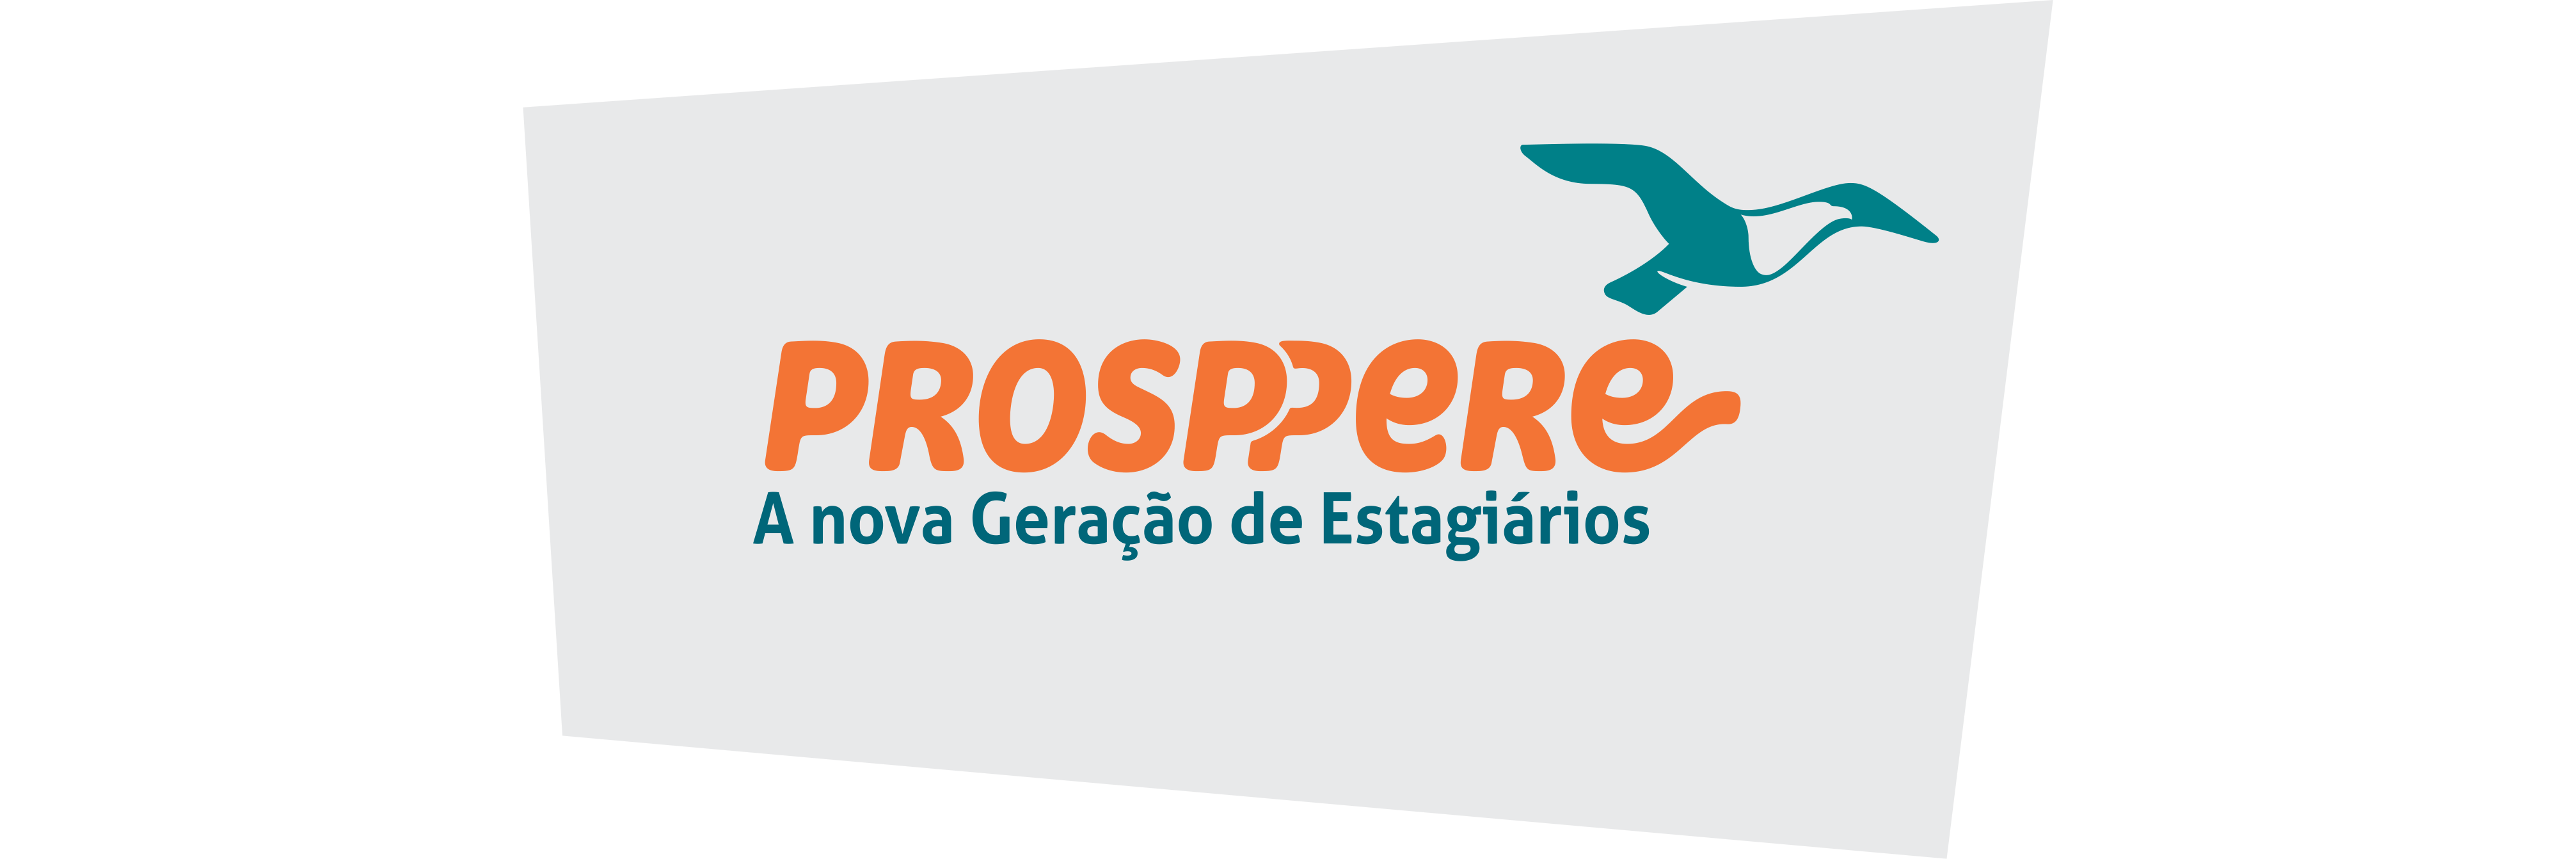 Prosppere